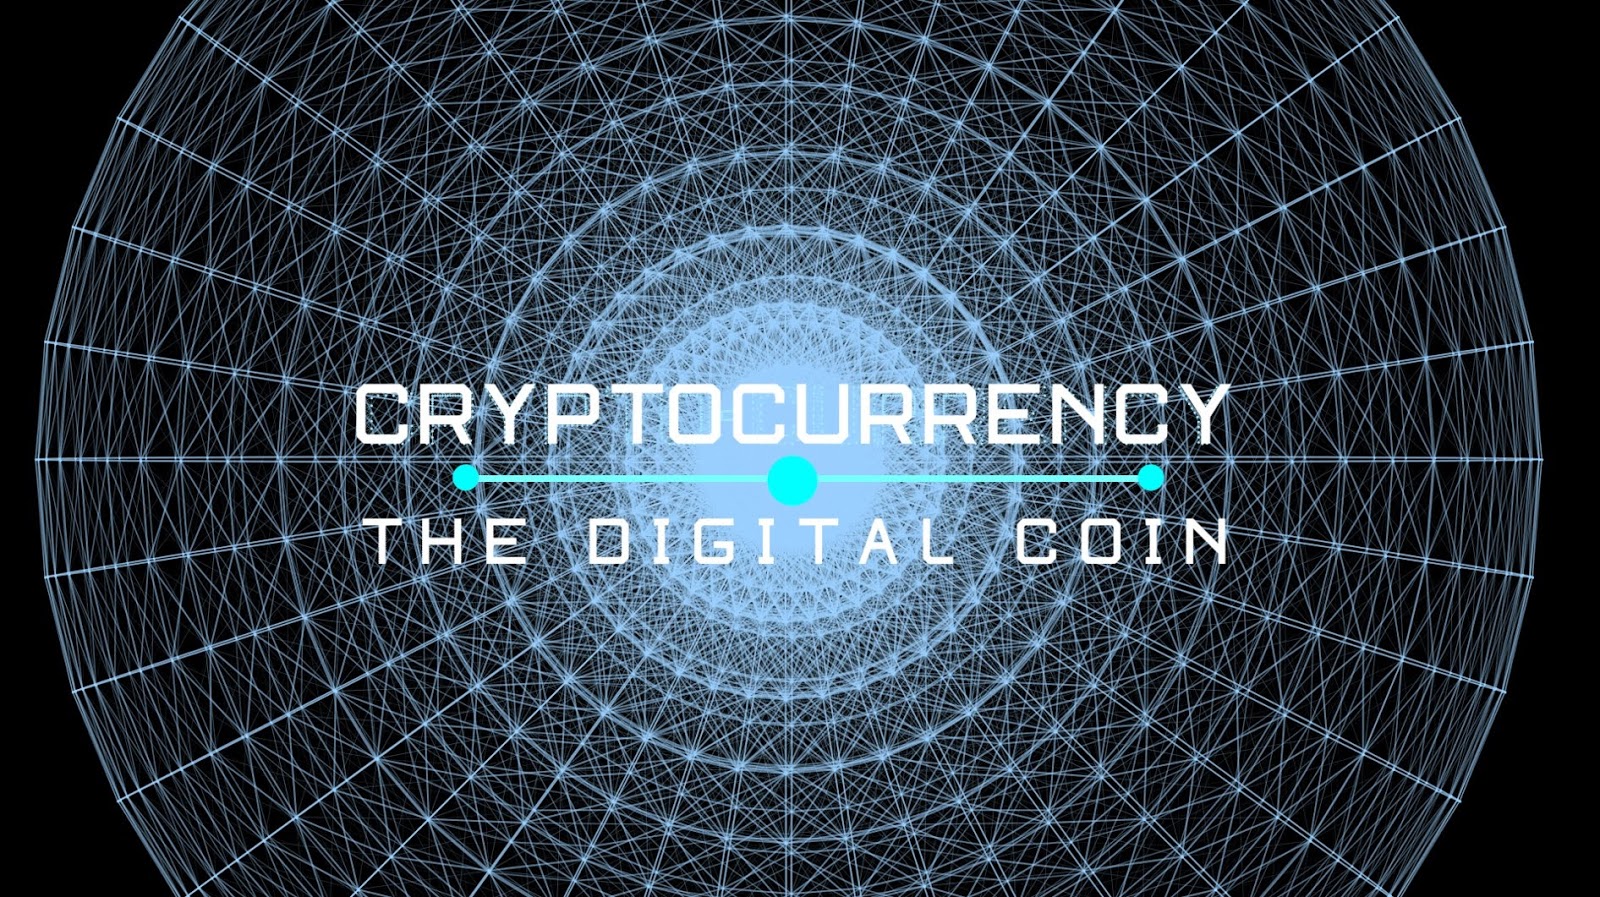 Cryptocurrencies - The New Frontier: This Very Well Could ...